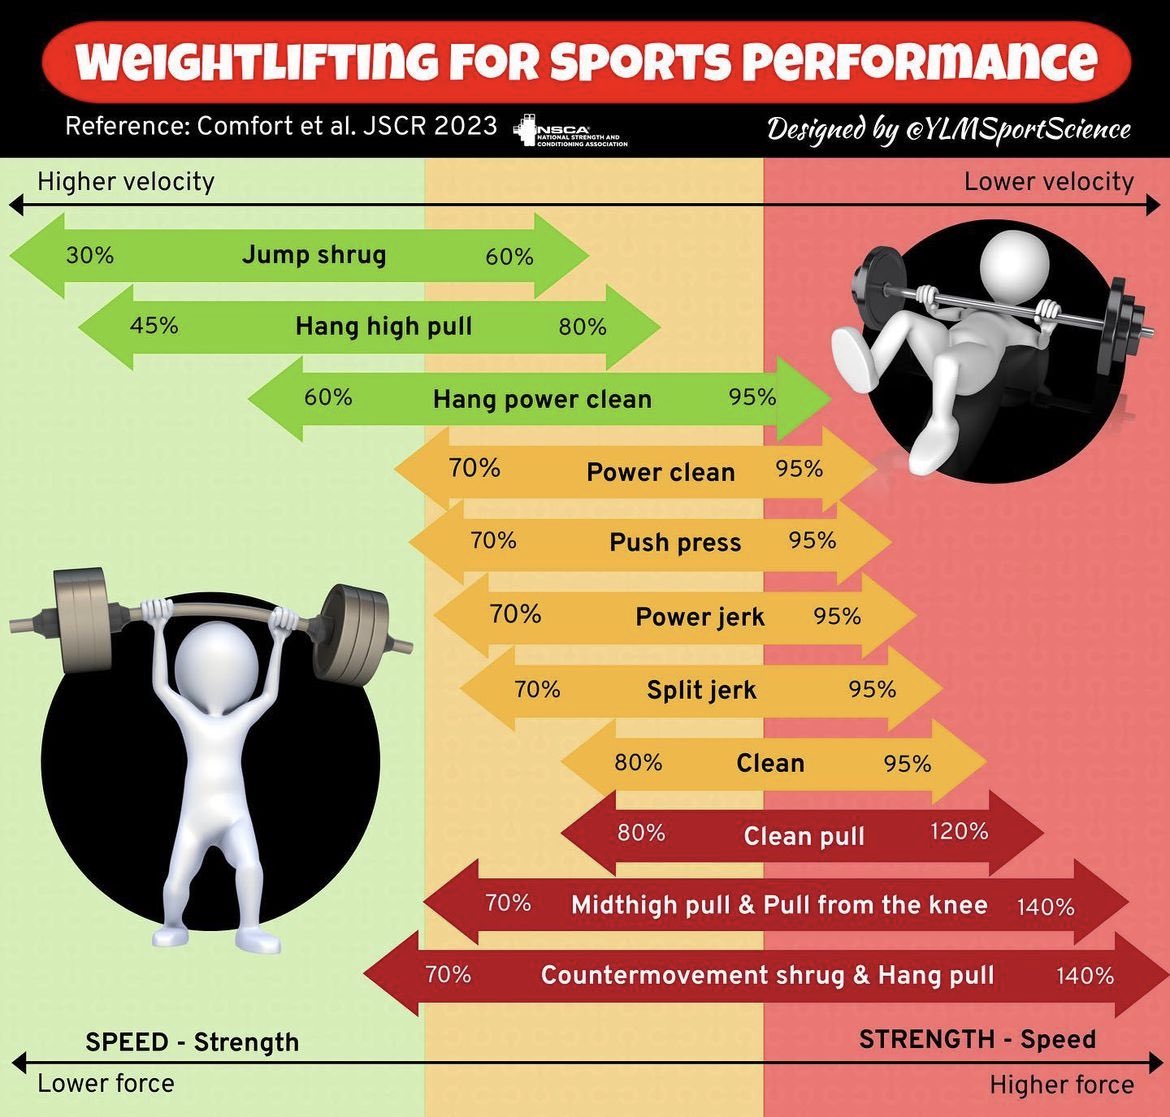 Nice infographic about the @NSCA weightlifting position stand!